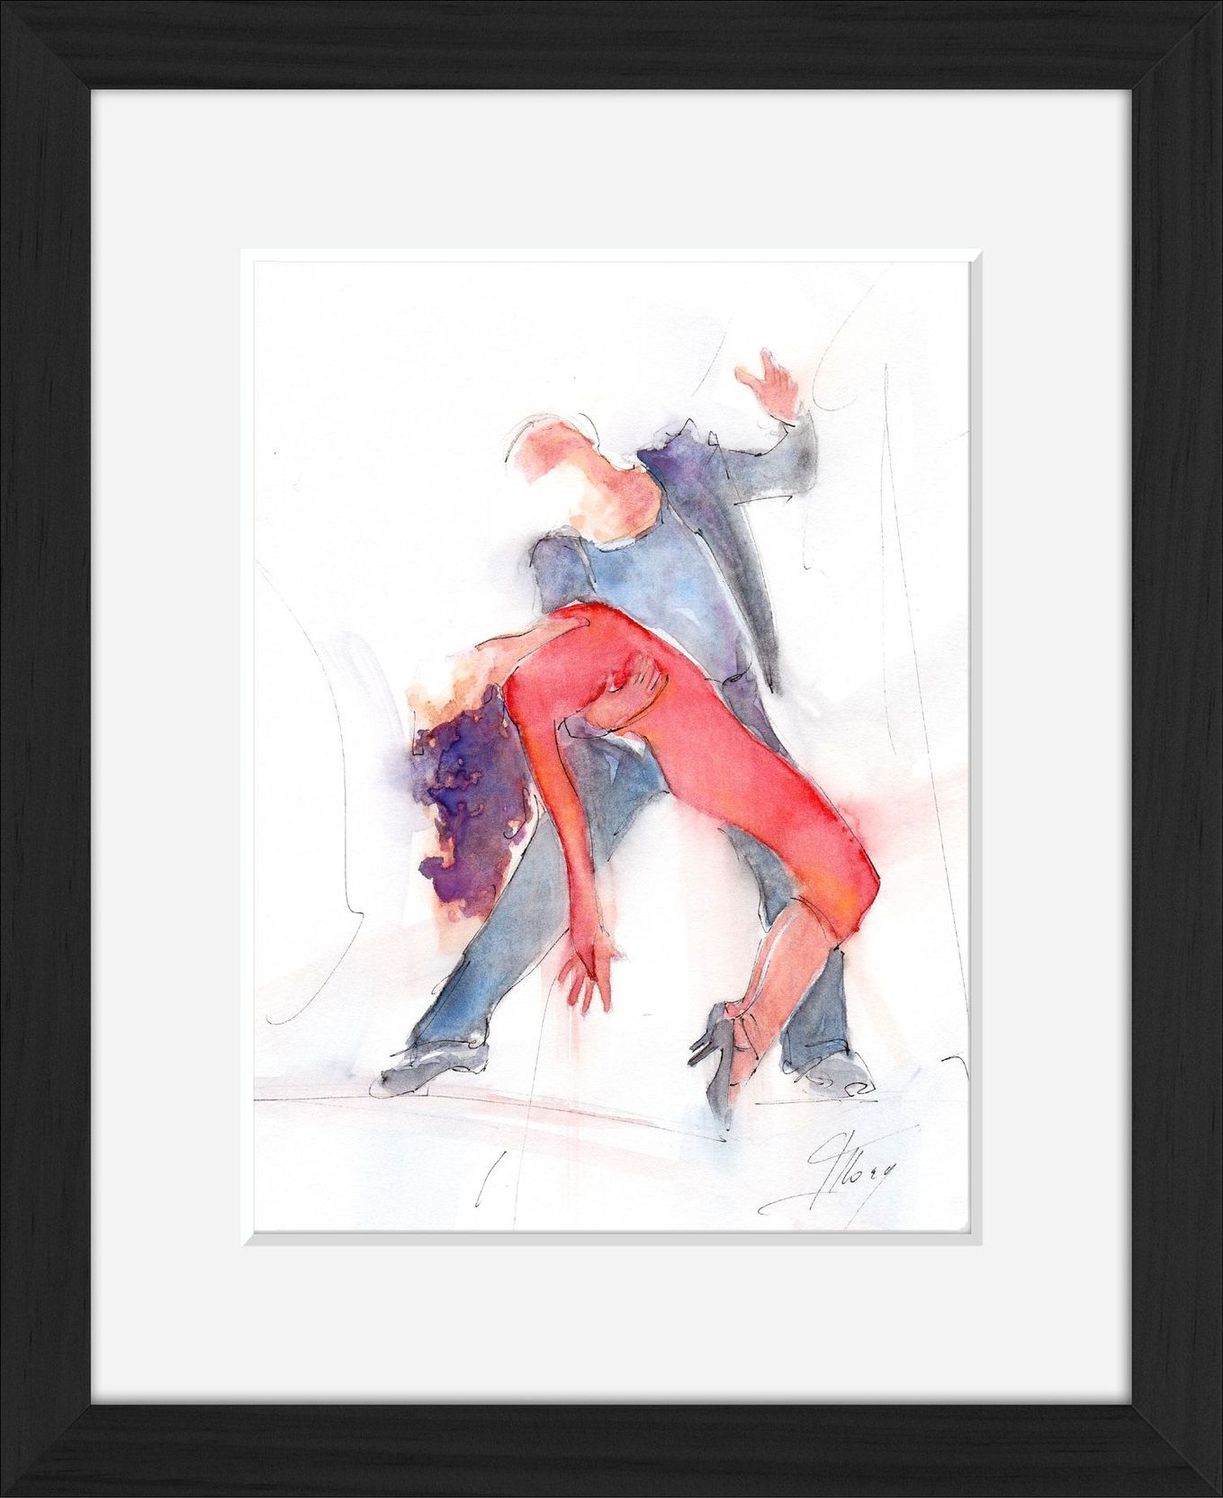 Modern dance watercolor painting - Lucie LLONG, artist of movement